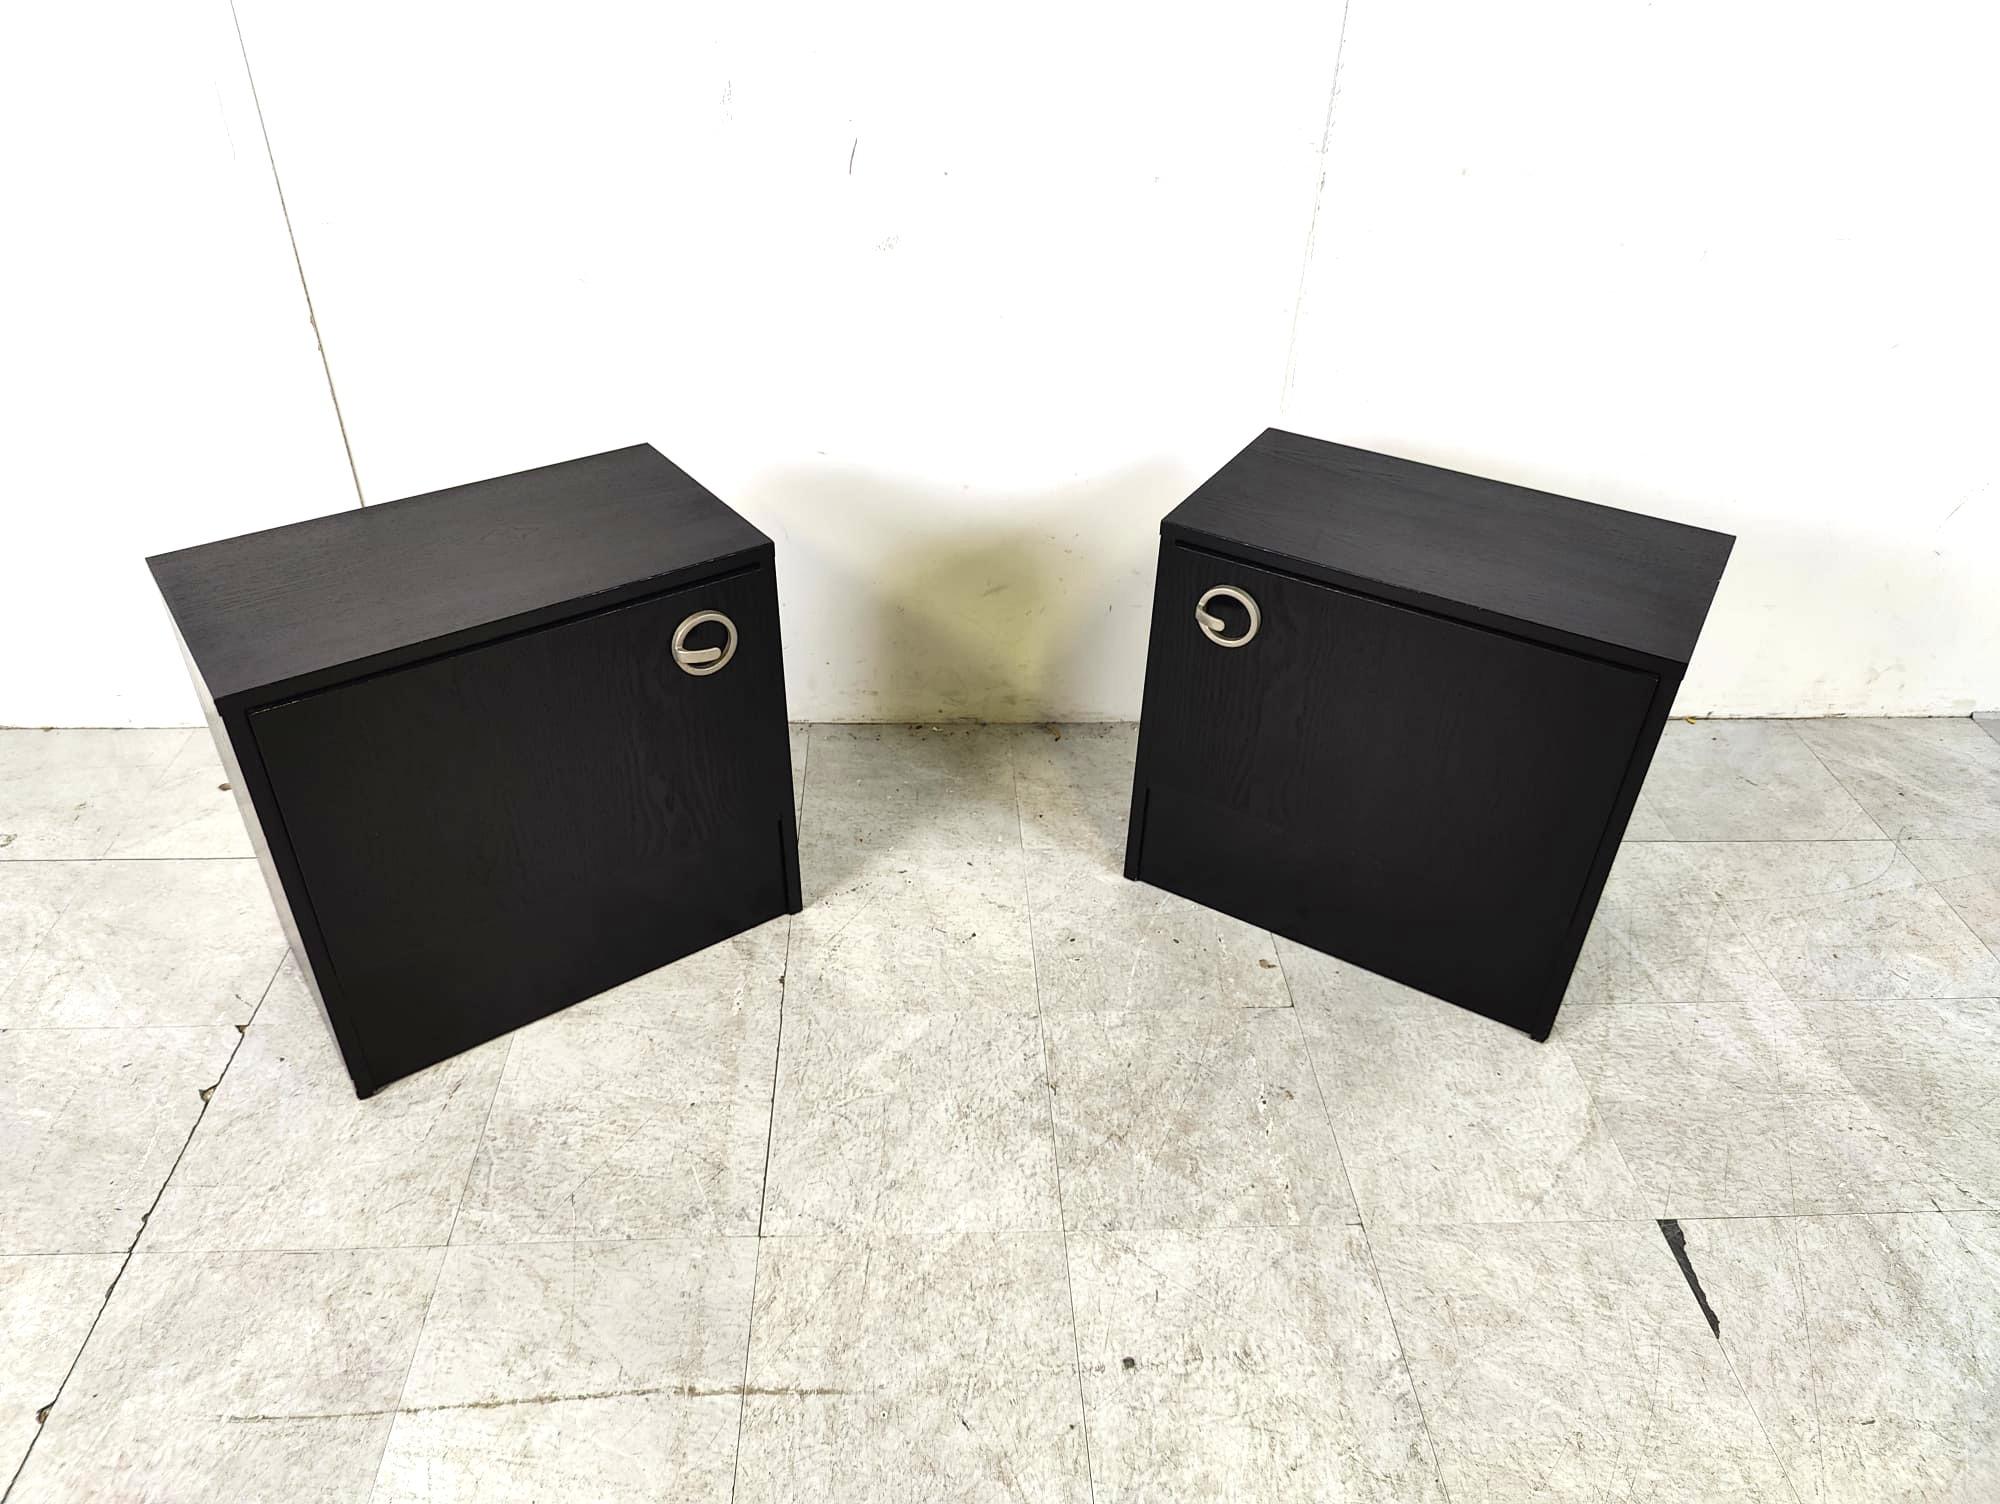 Pair of black wooden seventies bedside cabinets.

The cabinets have cool handles. 

1970s - Belgium

Good condition

Dimensions:
Height: 53cm
Width: 55cm
Depth: 33cm

Ref.: 6425151